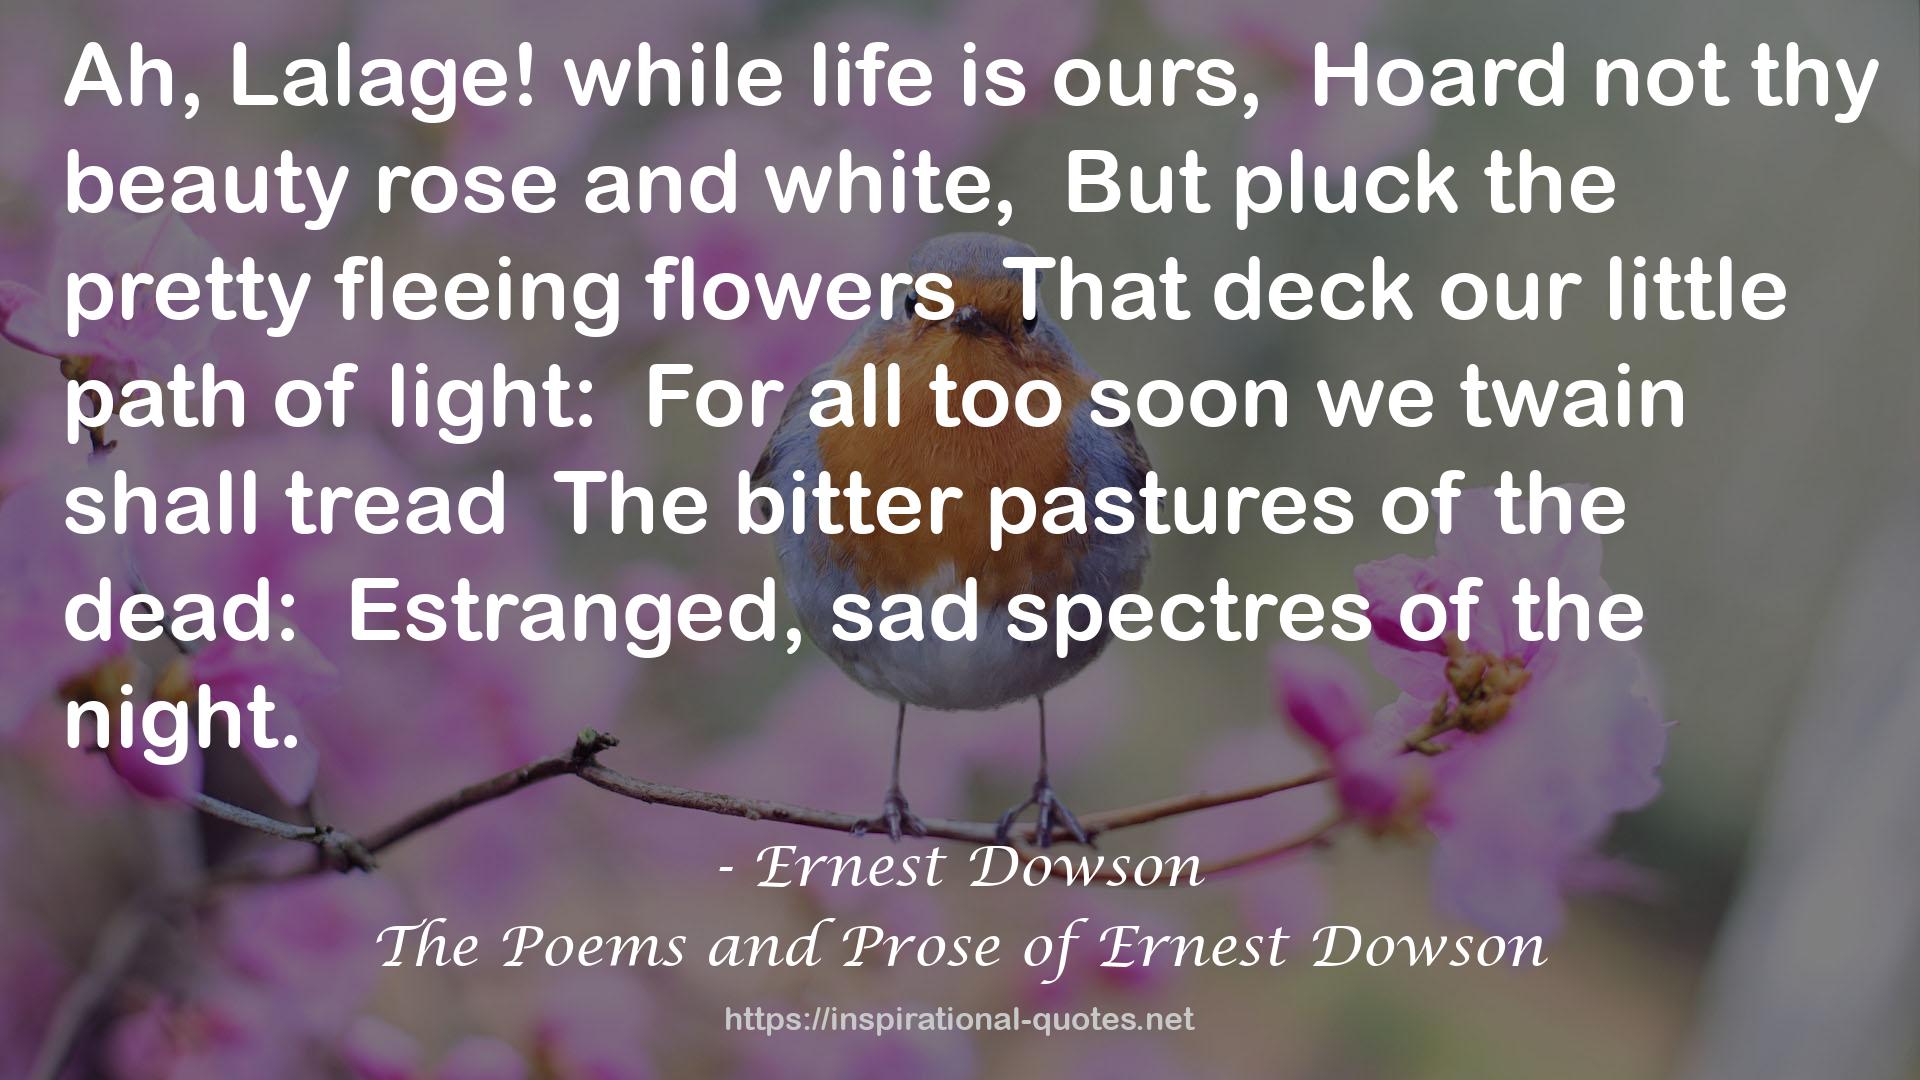 The Poems and Prose of Ernest Dowson QUOTES